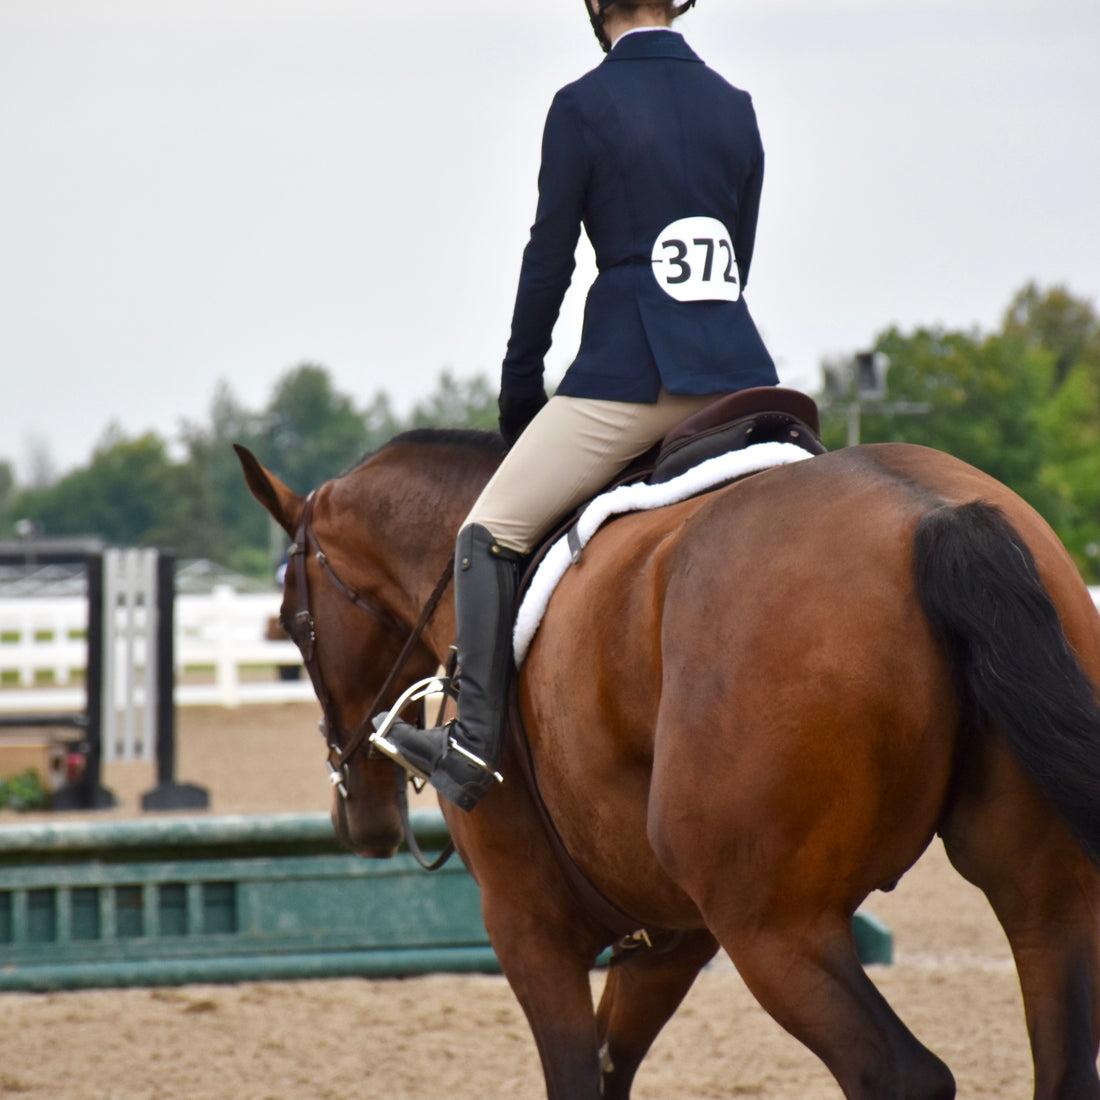 Horse Show Anxiety and How to Deal With It